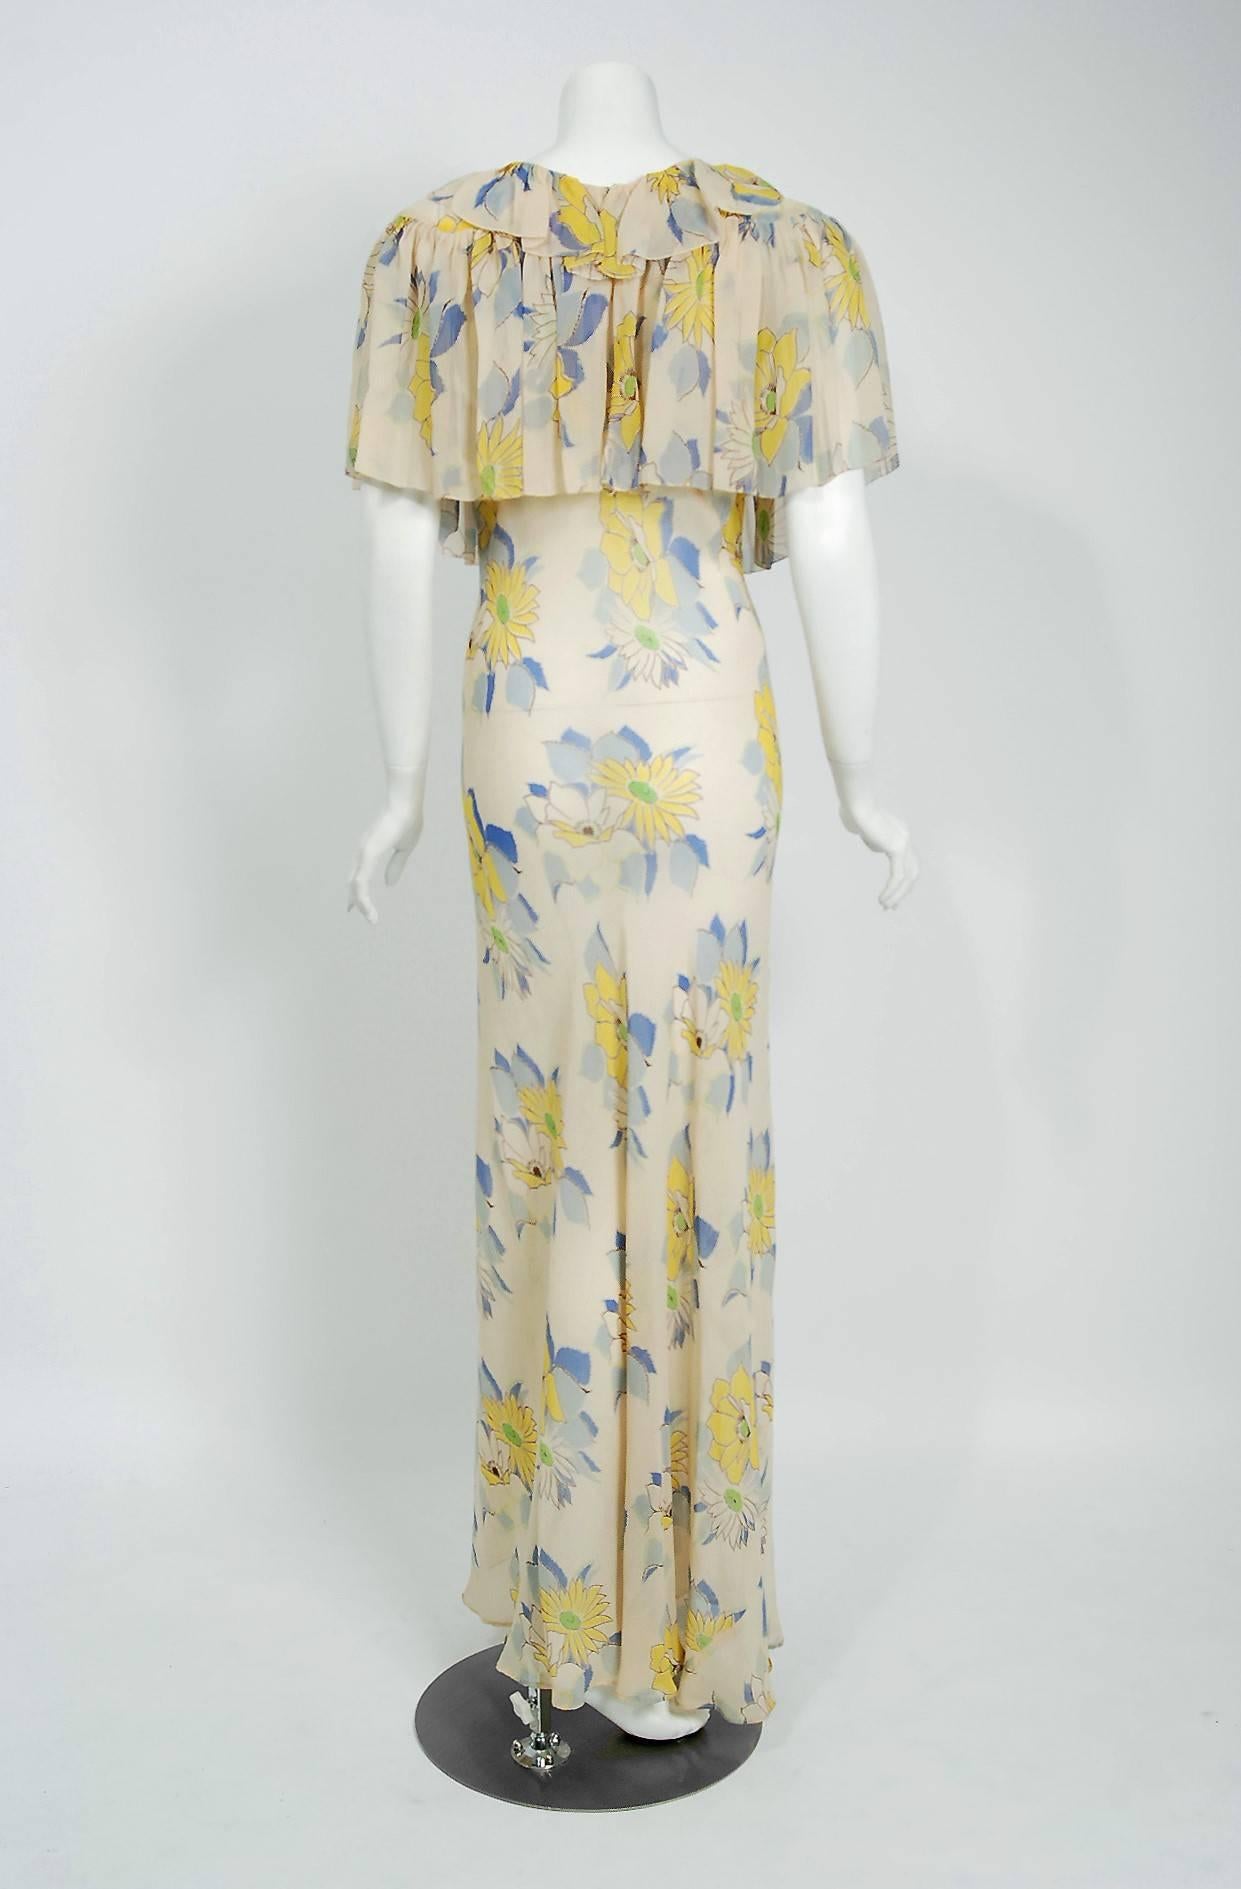 Women's 1930's Ethereal Floral Garden Print Silk Chiffon Bias Cut Pleated Capelet Gown